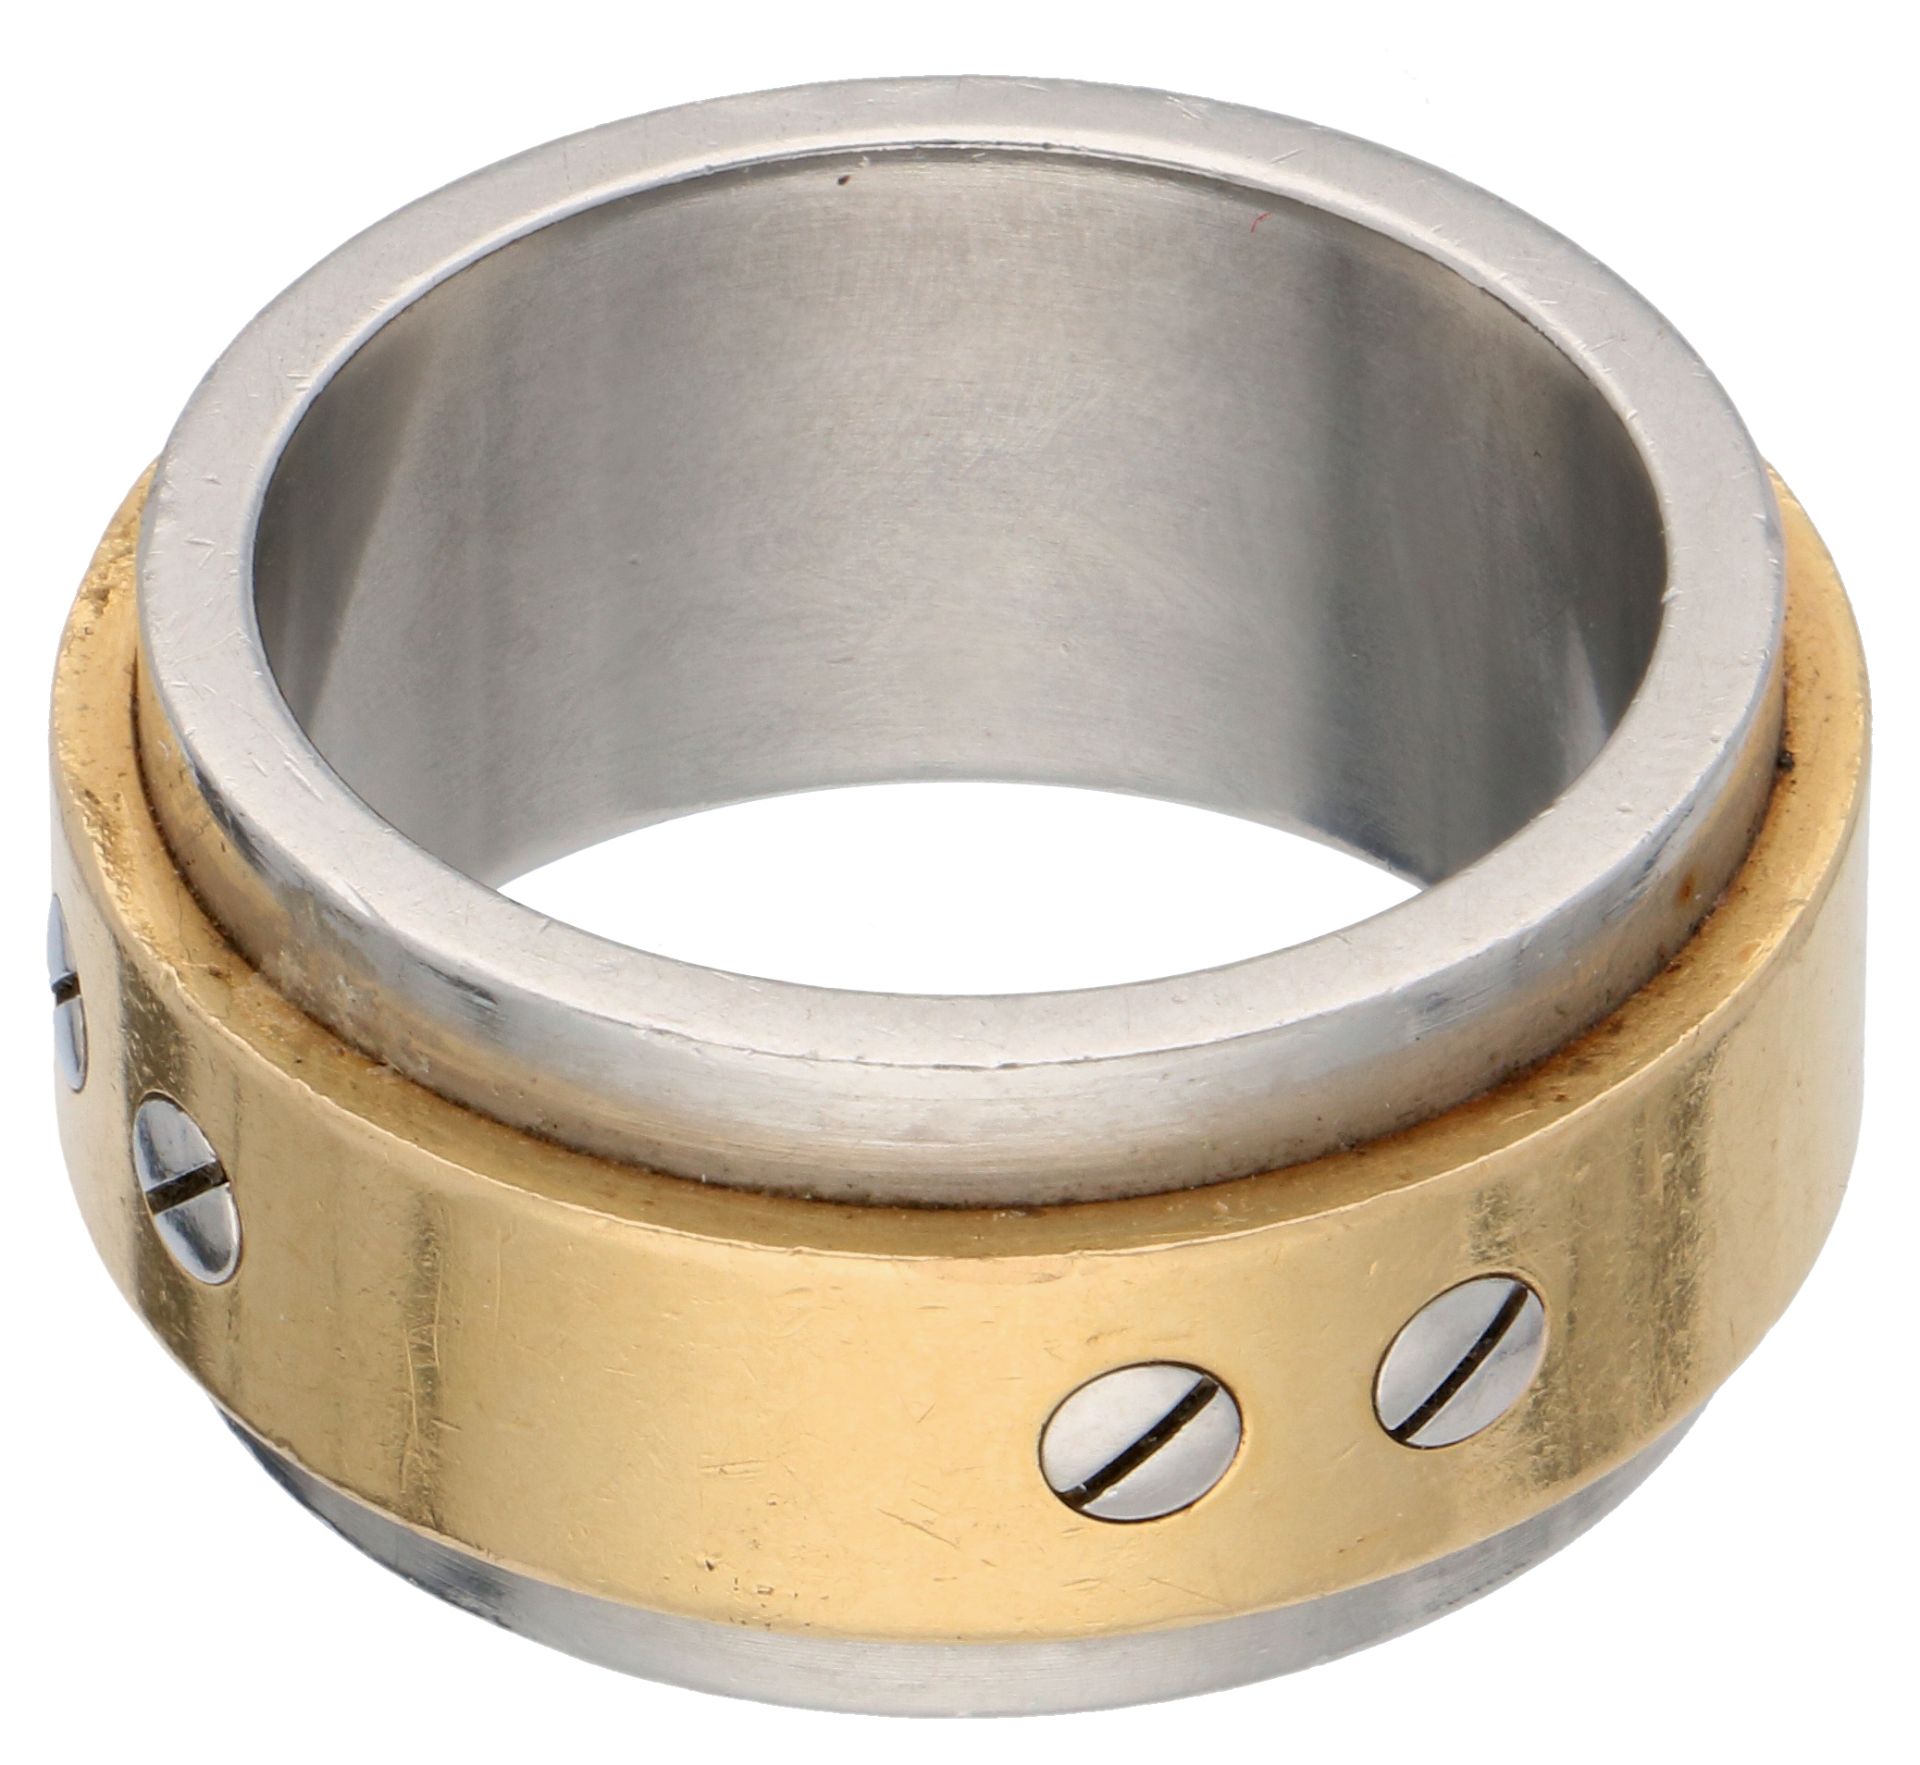 No Reserve - Cartier 18K yellow gold/steel Santos ring. - Image 2 of 3